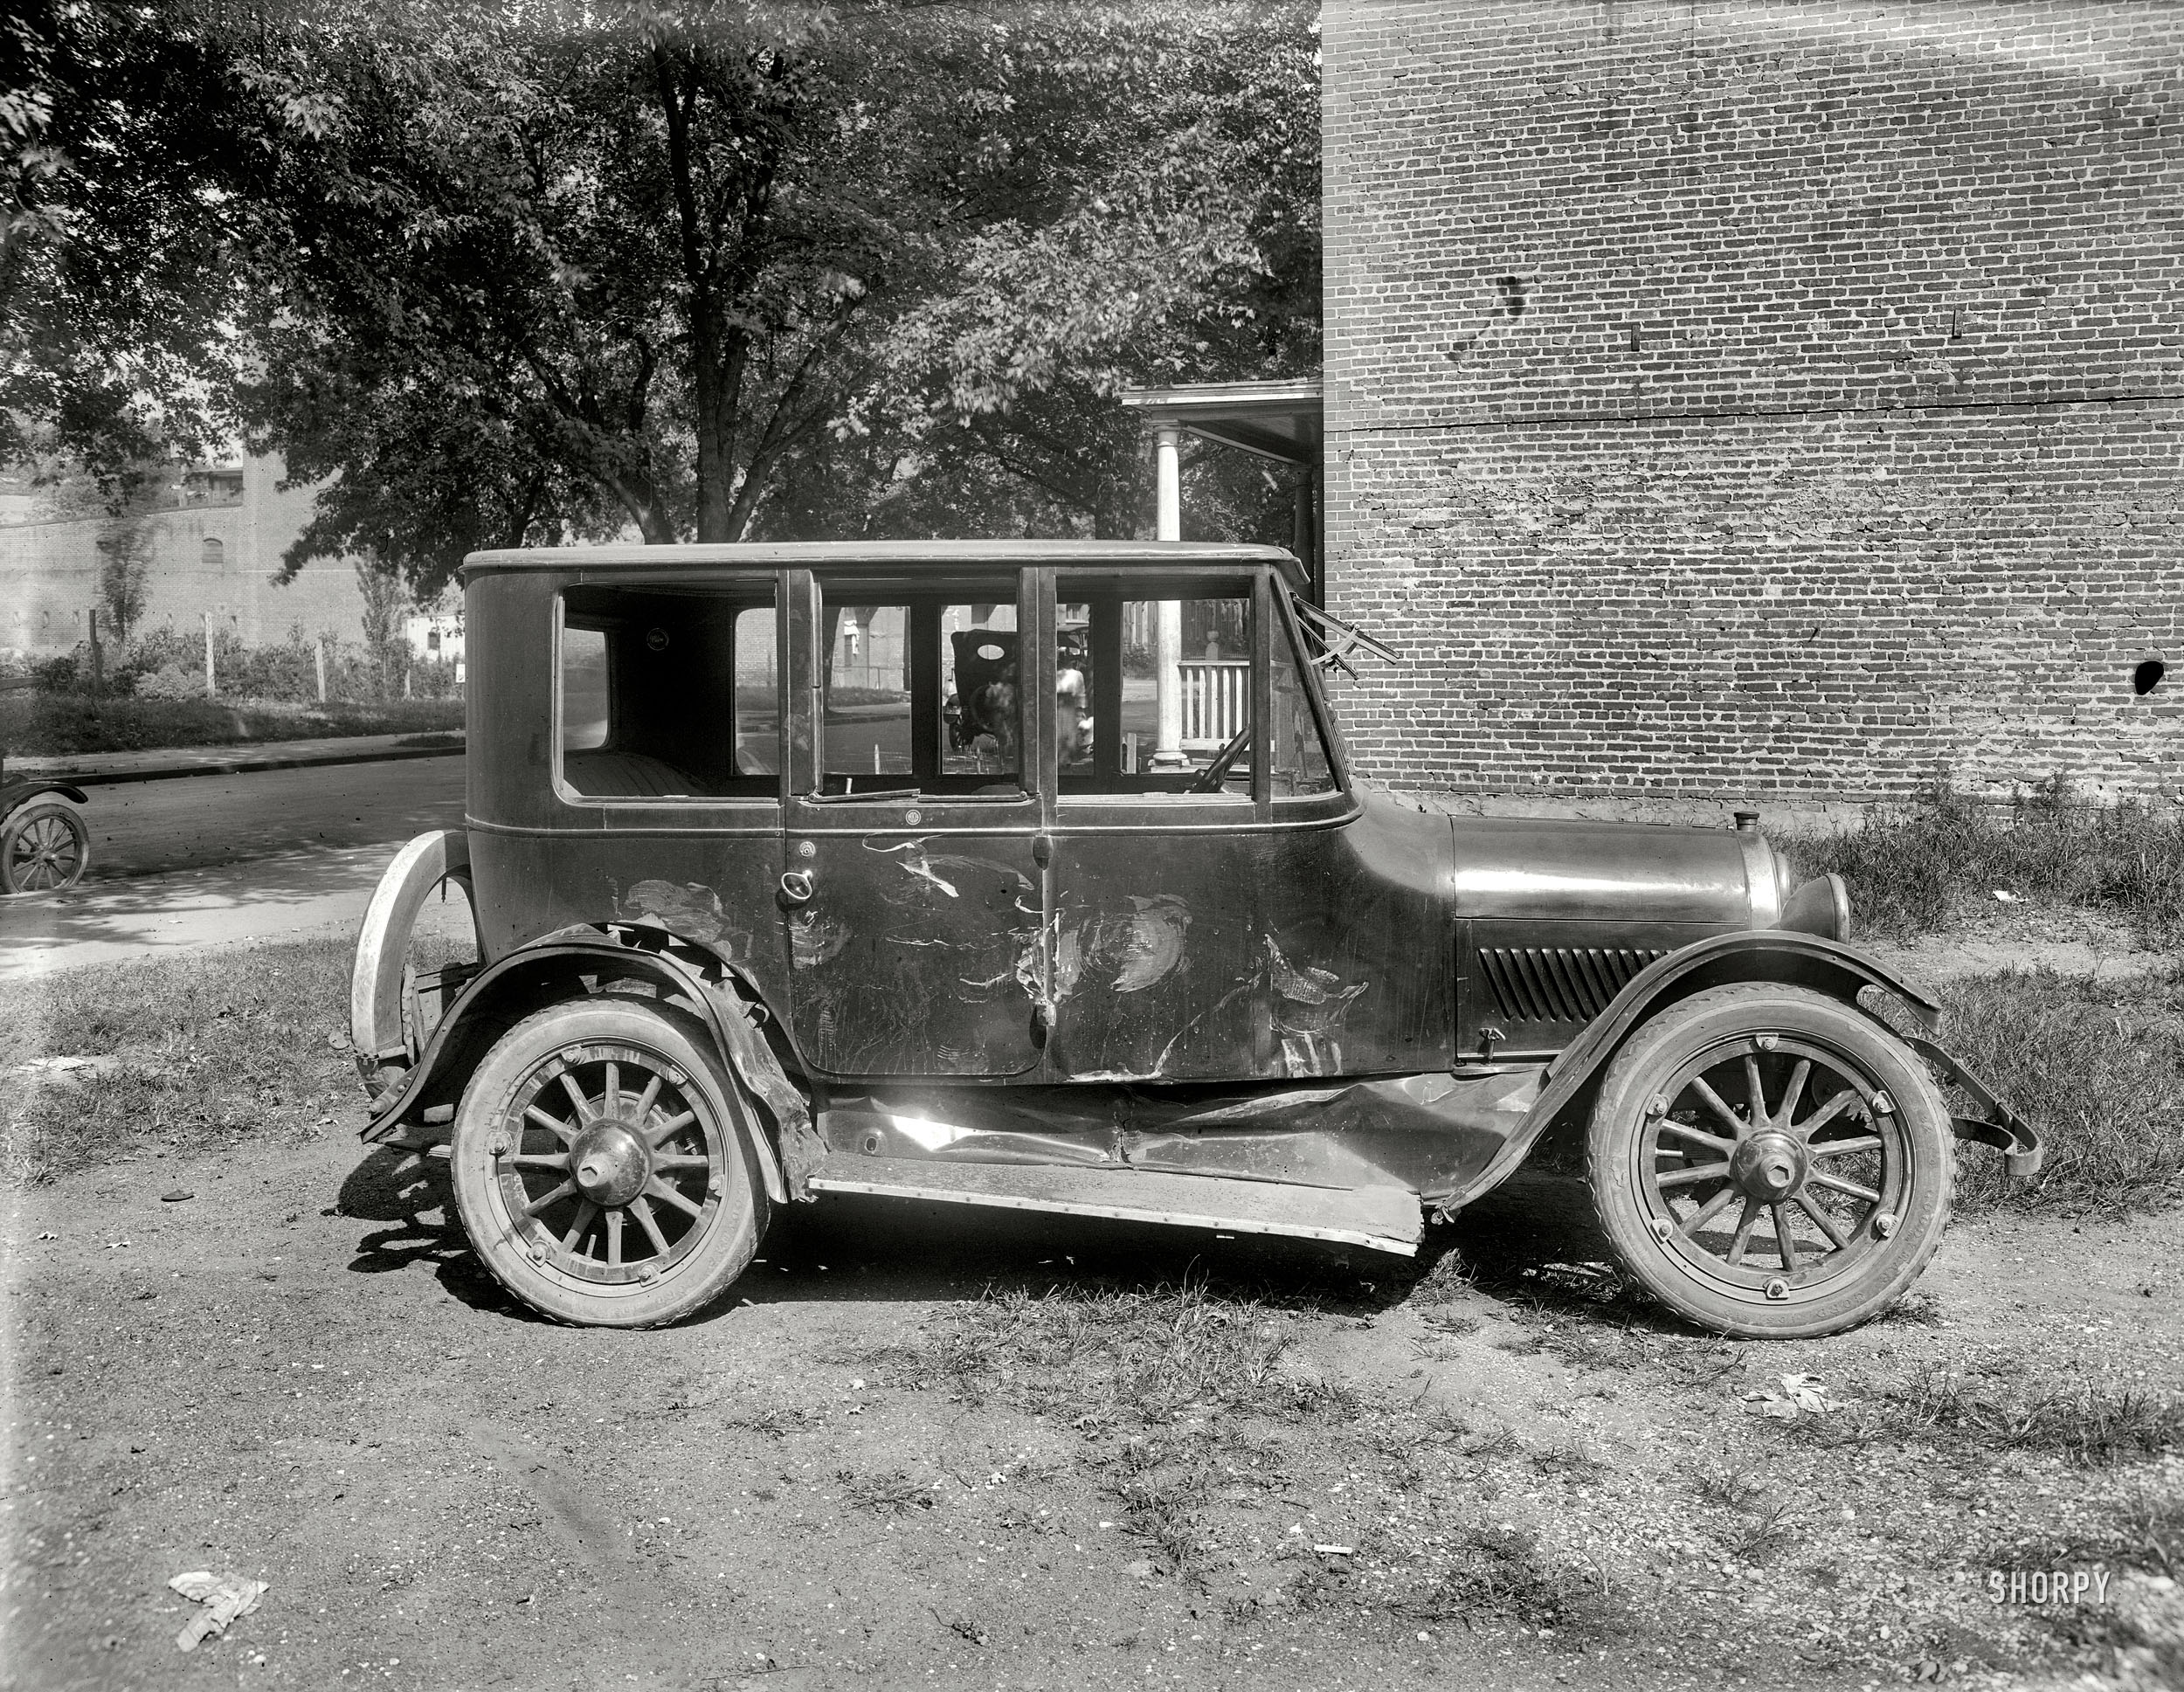 Washington, D.C., circa 1920. "Wayne Smith Auto Co. -- wrecked Haynes sedan." Out second glimpse at the operations of this long-forgotten car dealer. National Photo Company Collection glass negative. View full size.